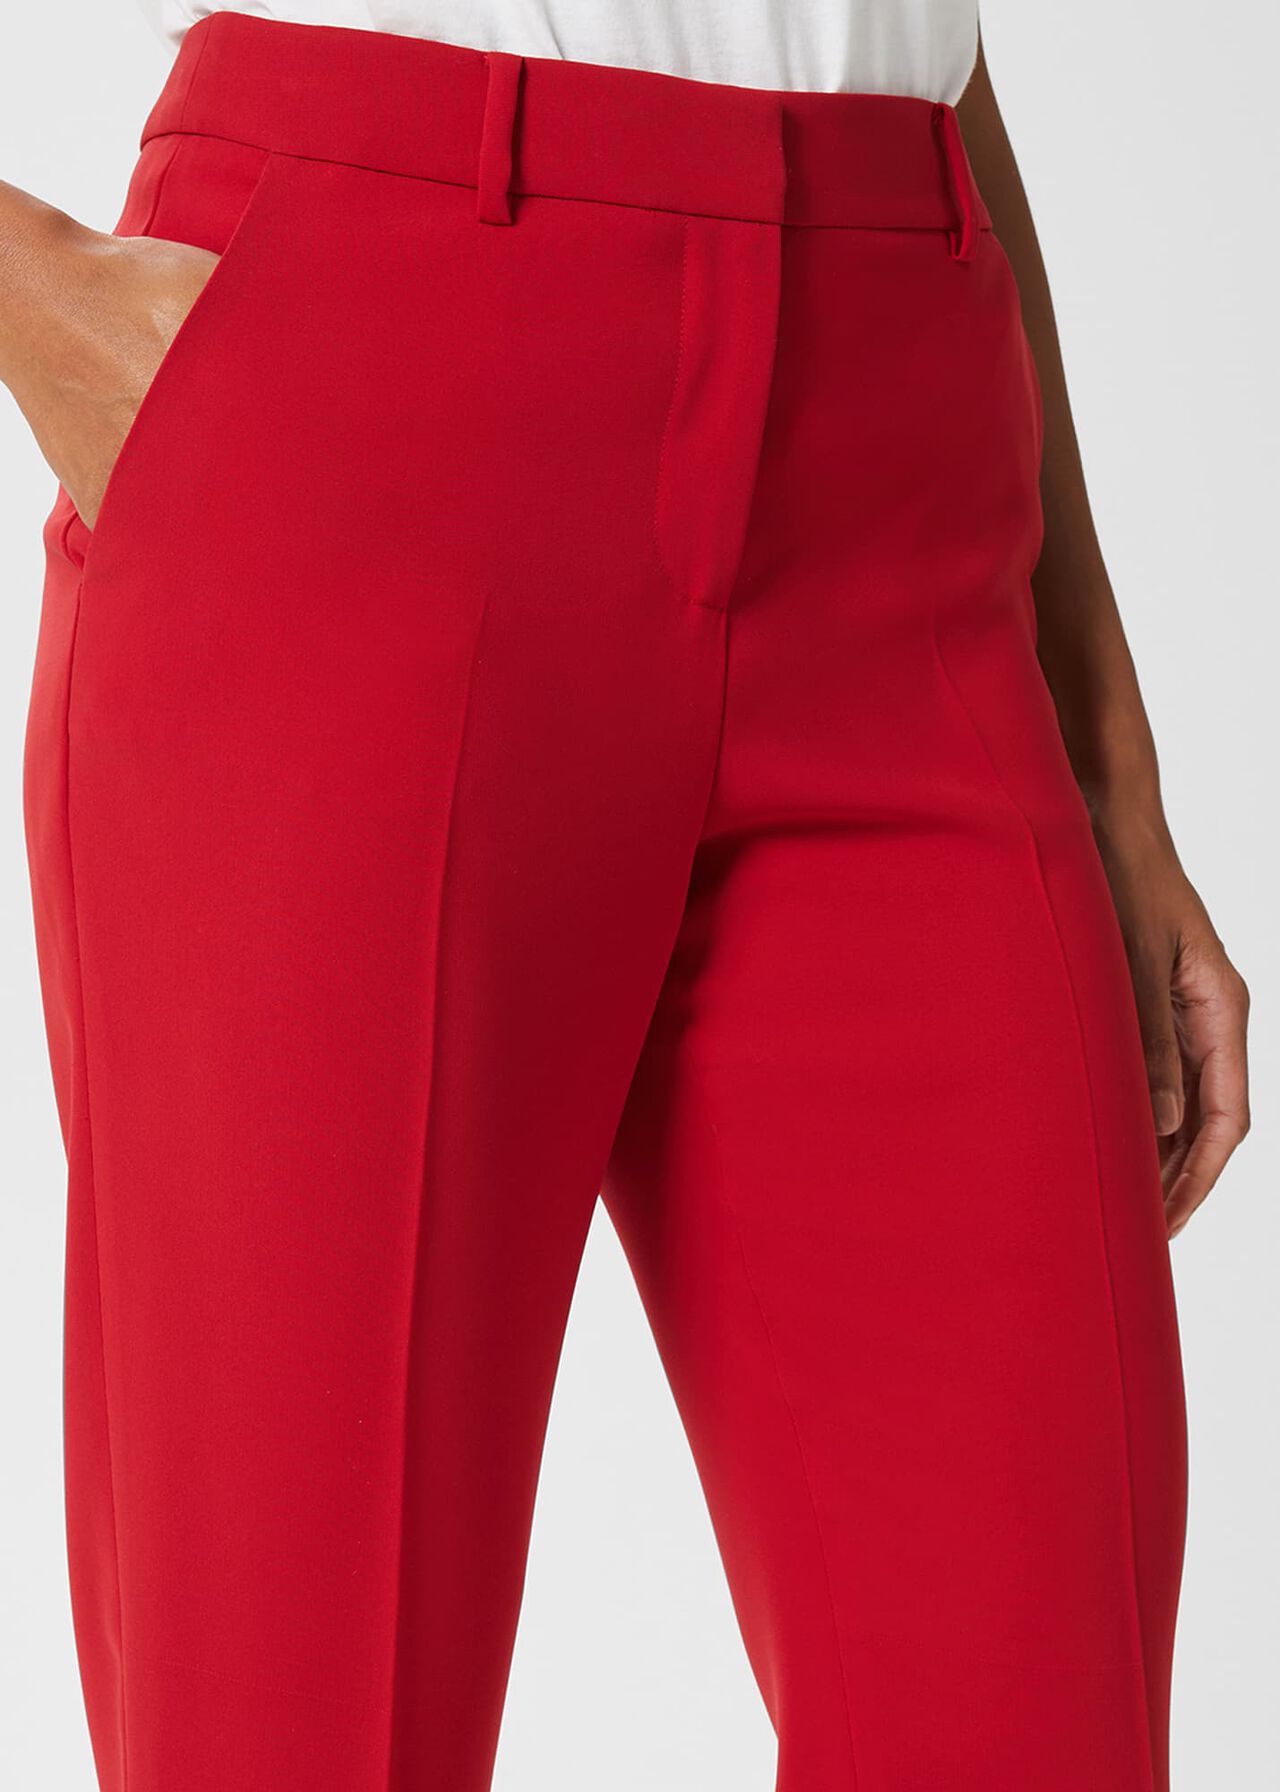 Adelia Trousers, Red, hi-res